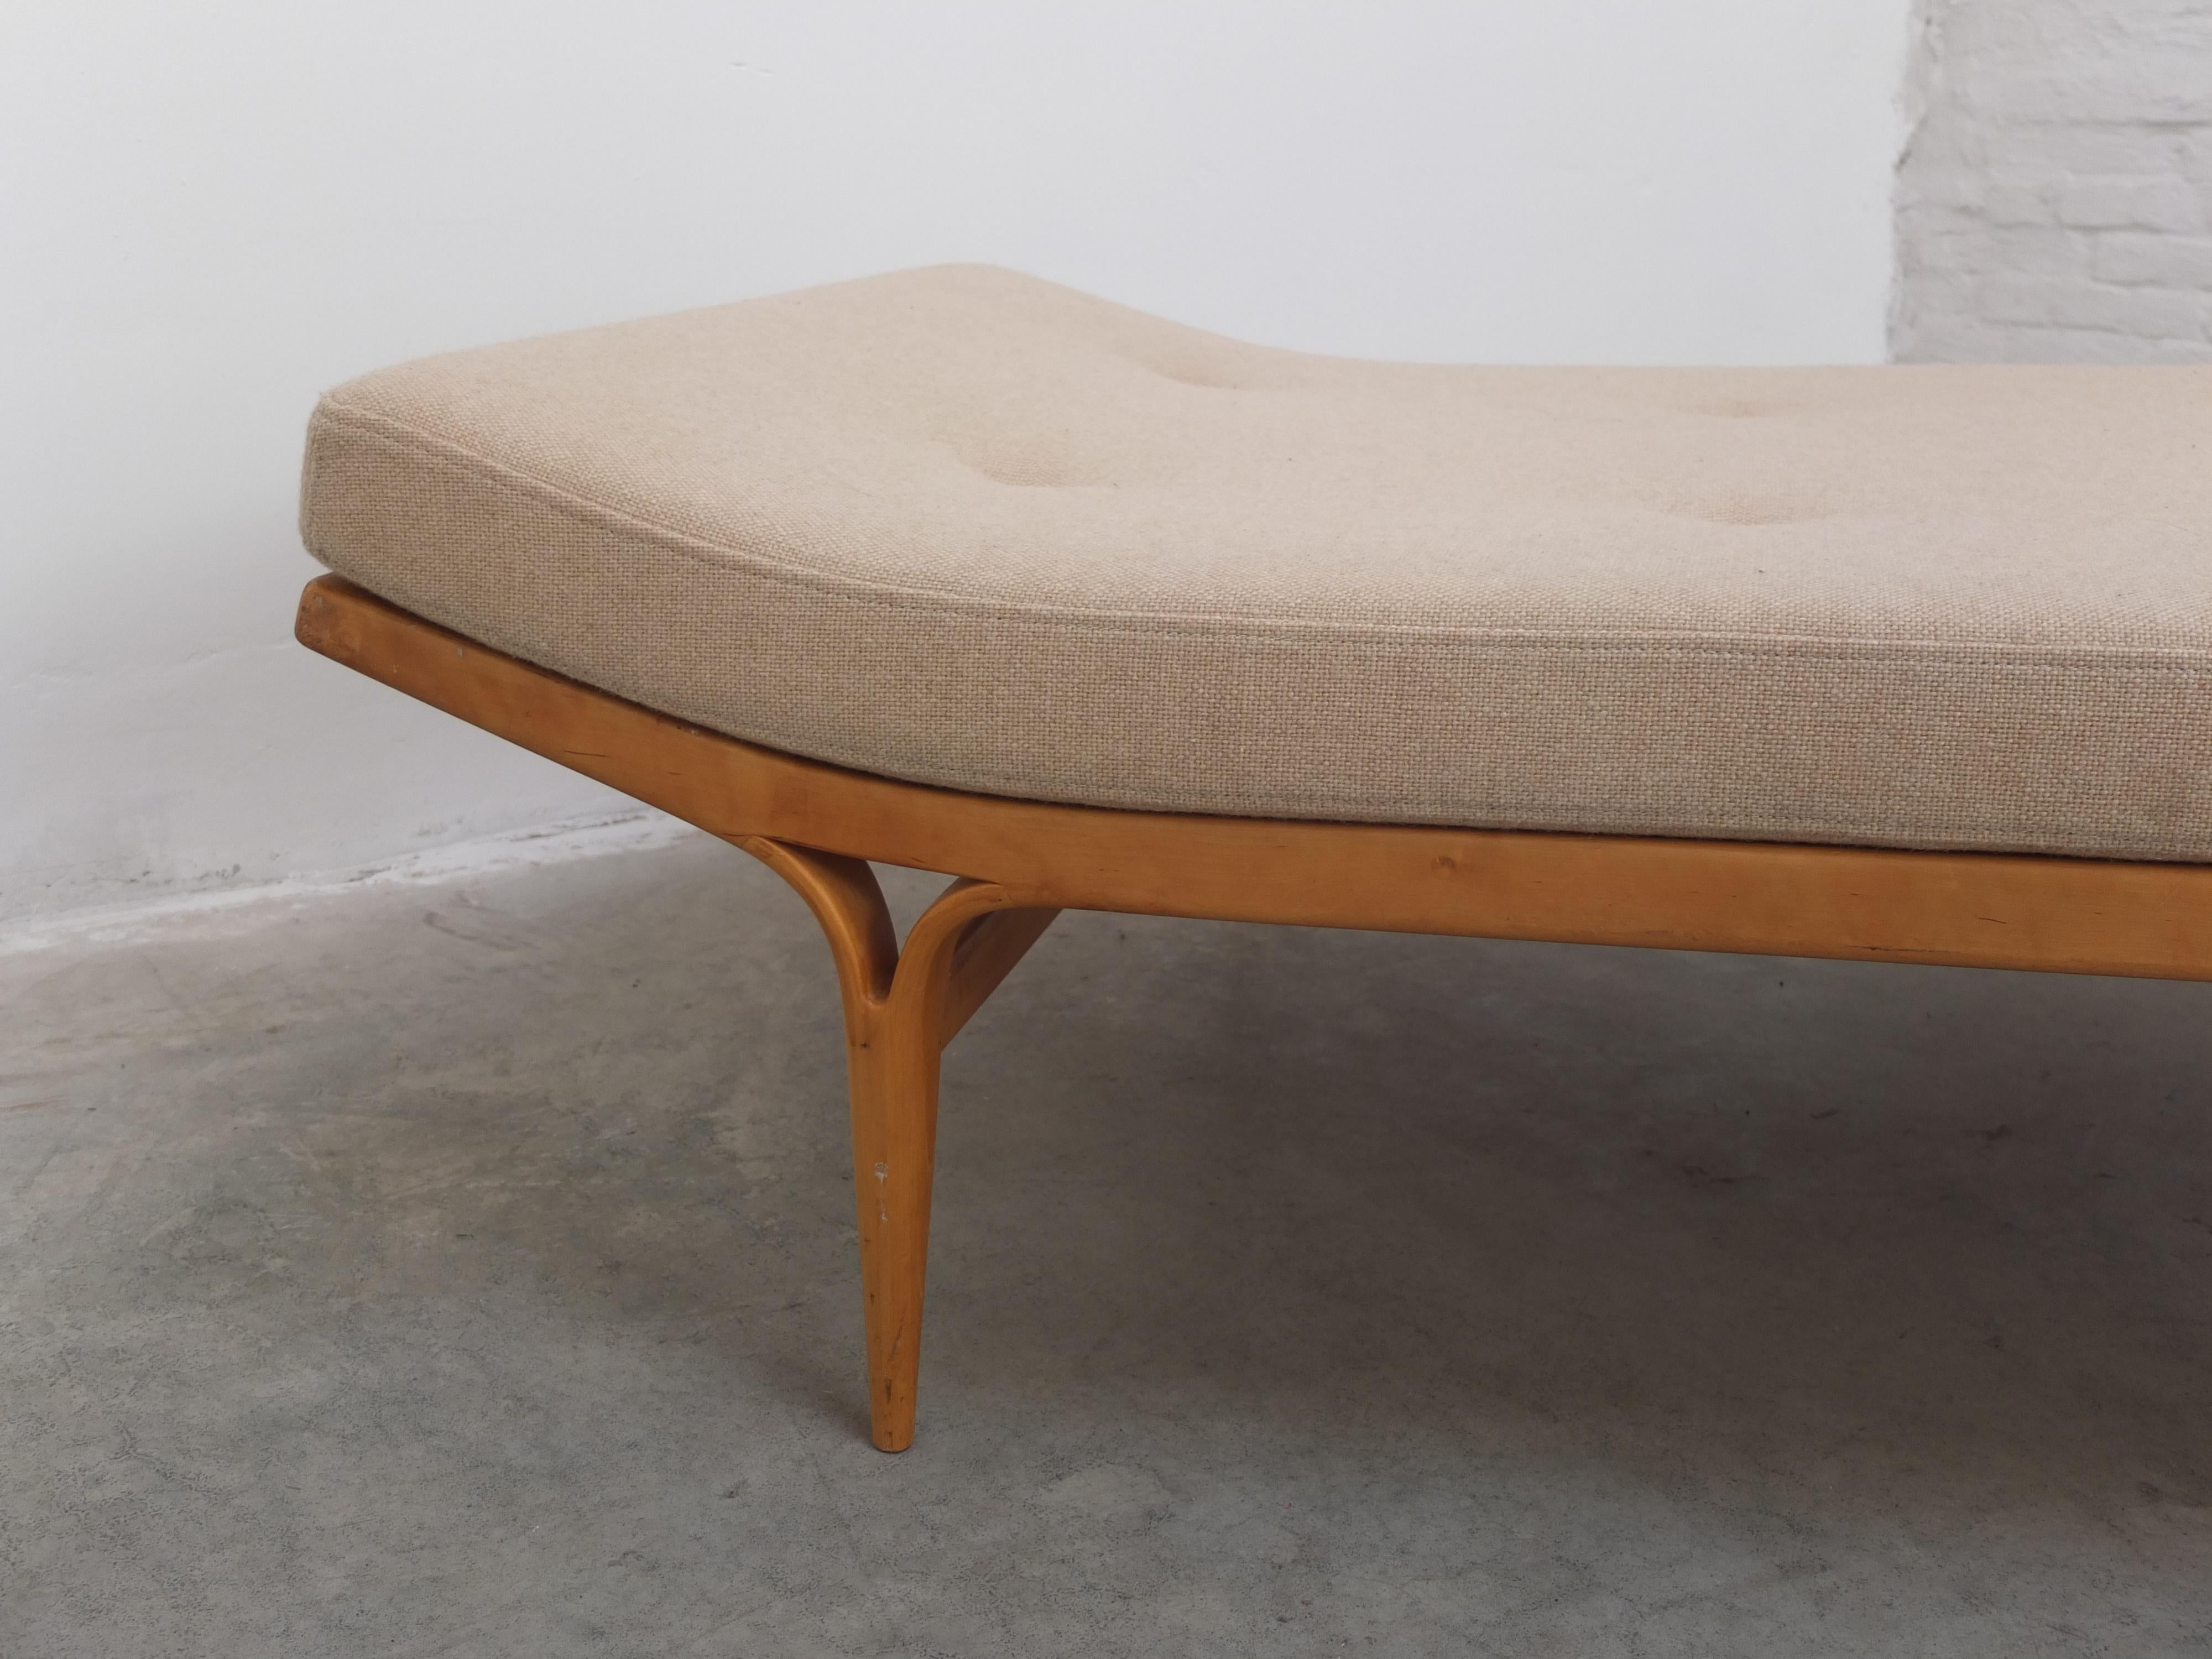 Rare 'Berlin' Daybed by Bruno Mathsson for Karl Mathsson, 1957 For Sale 3